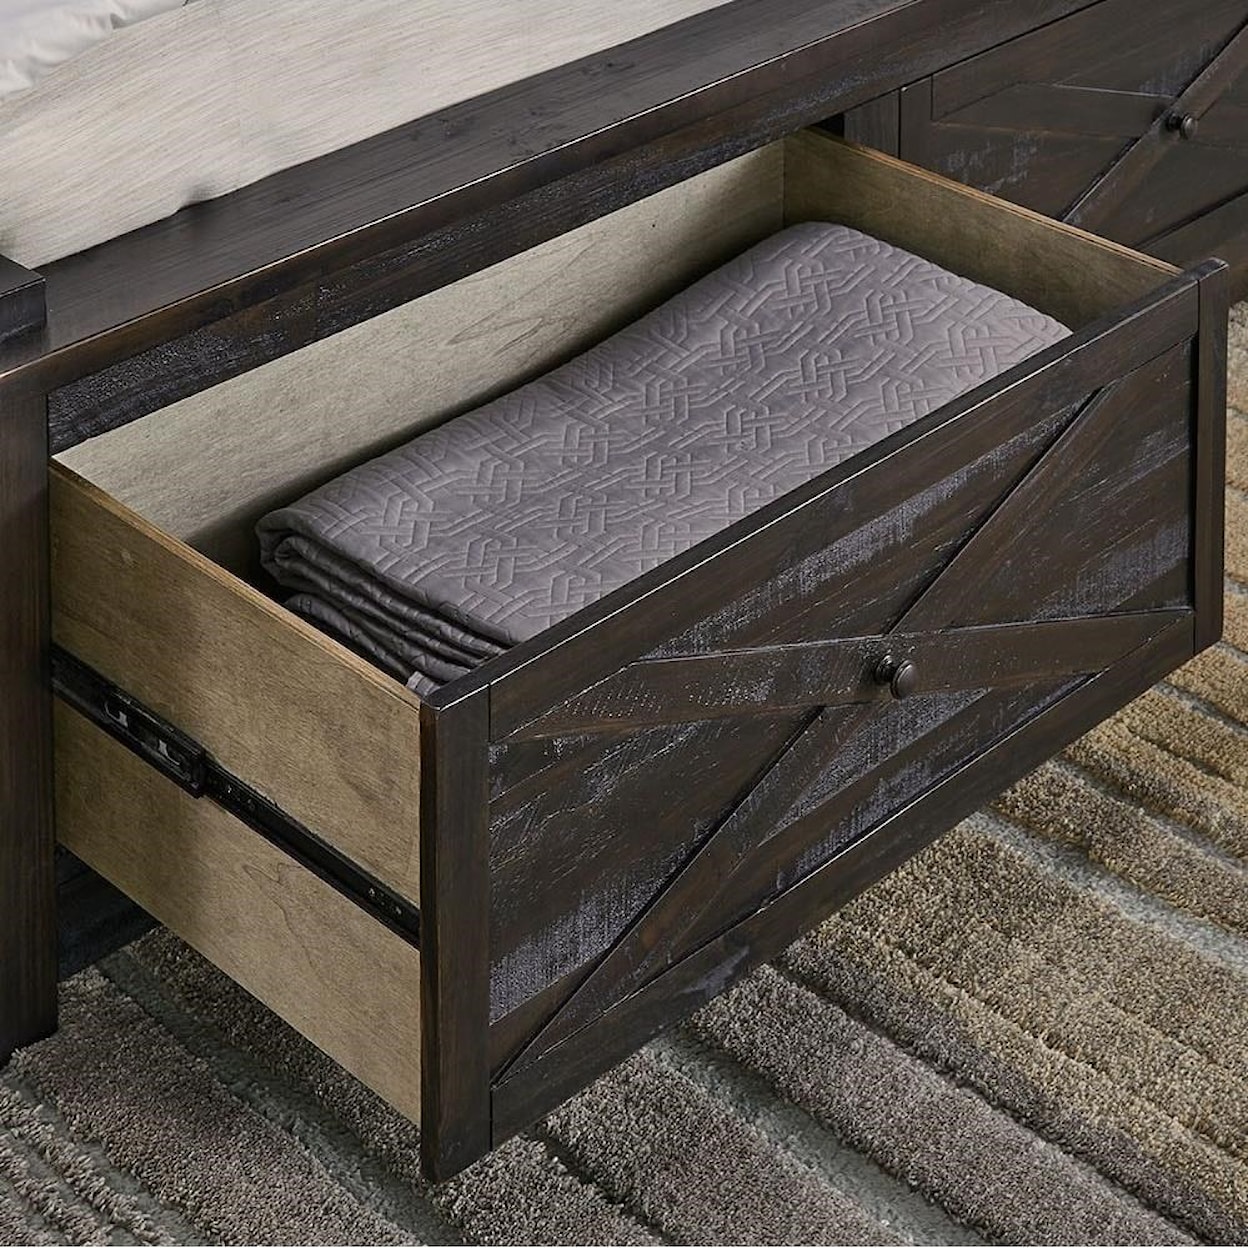 A-A Sun Valley King Bed with Footboard Bench